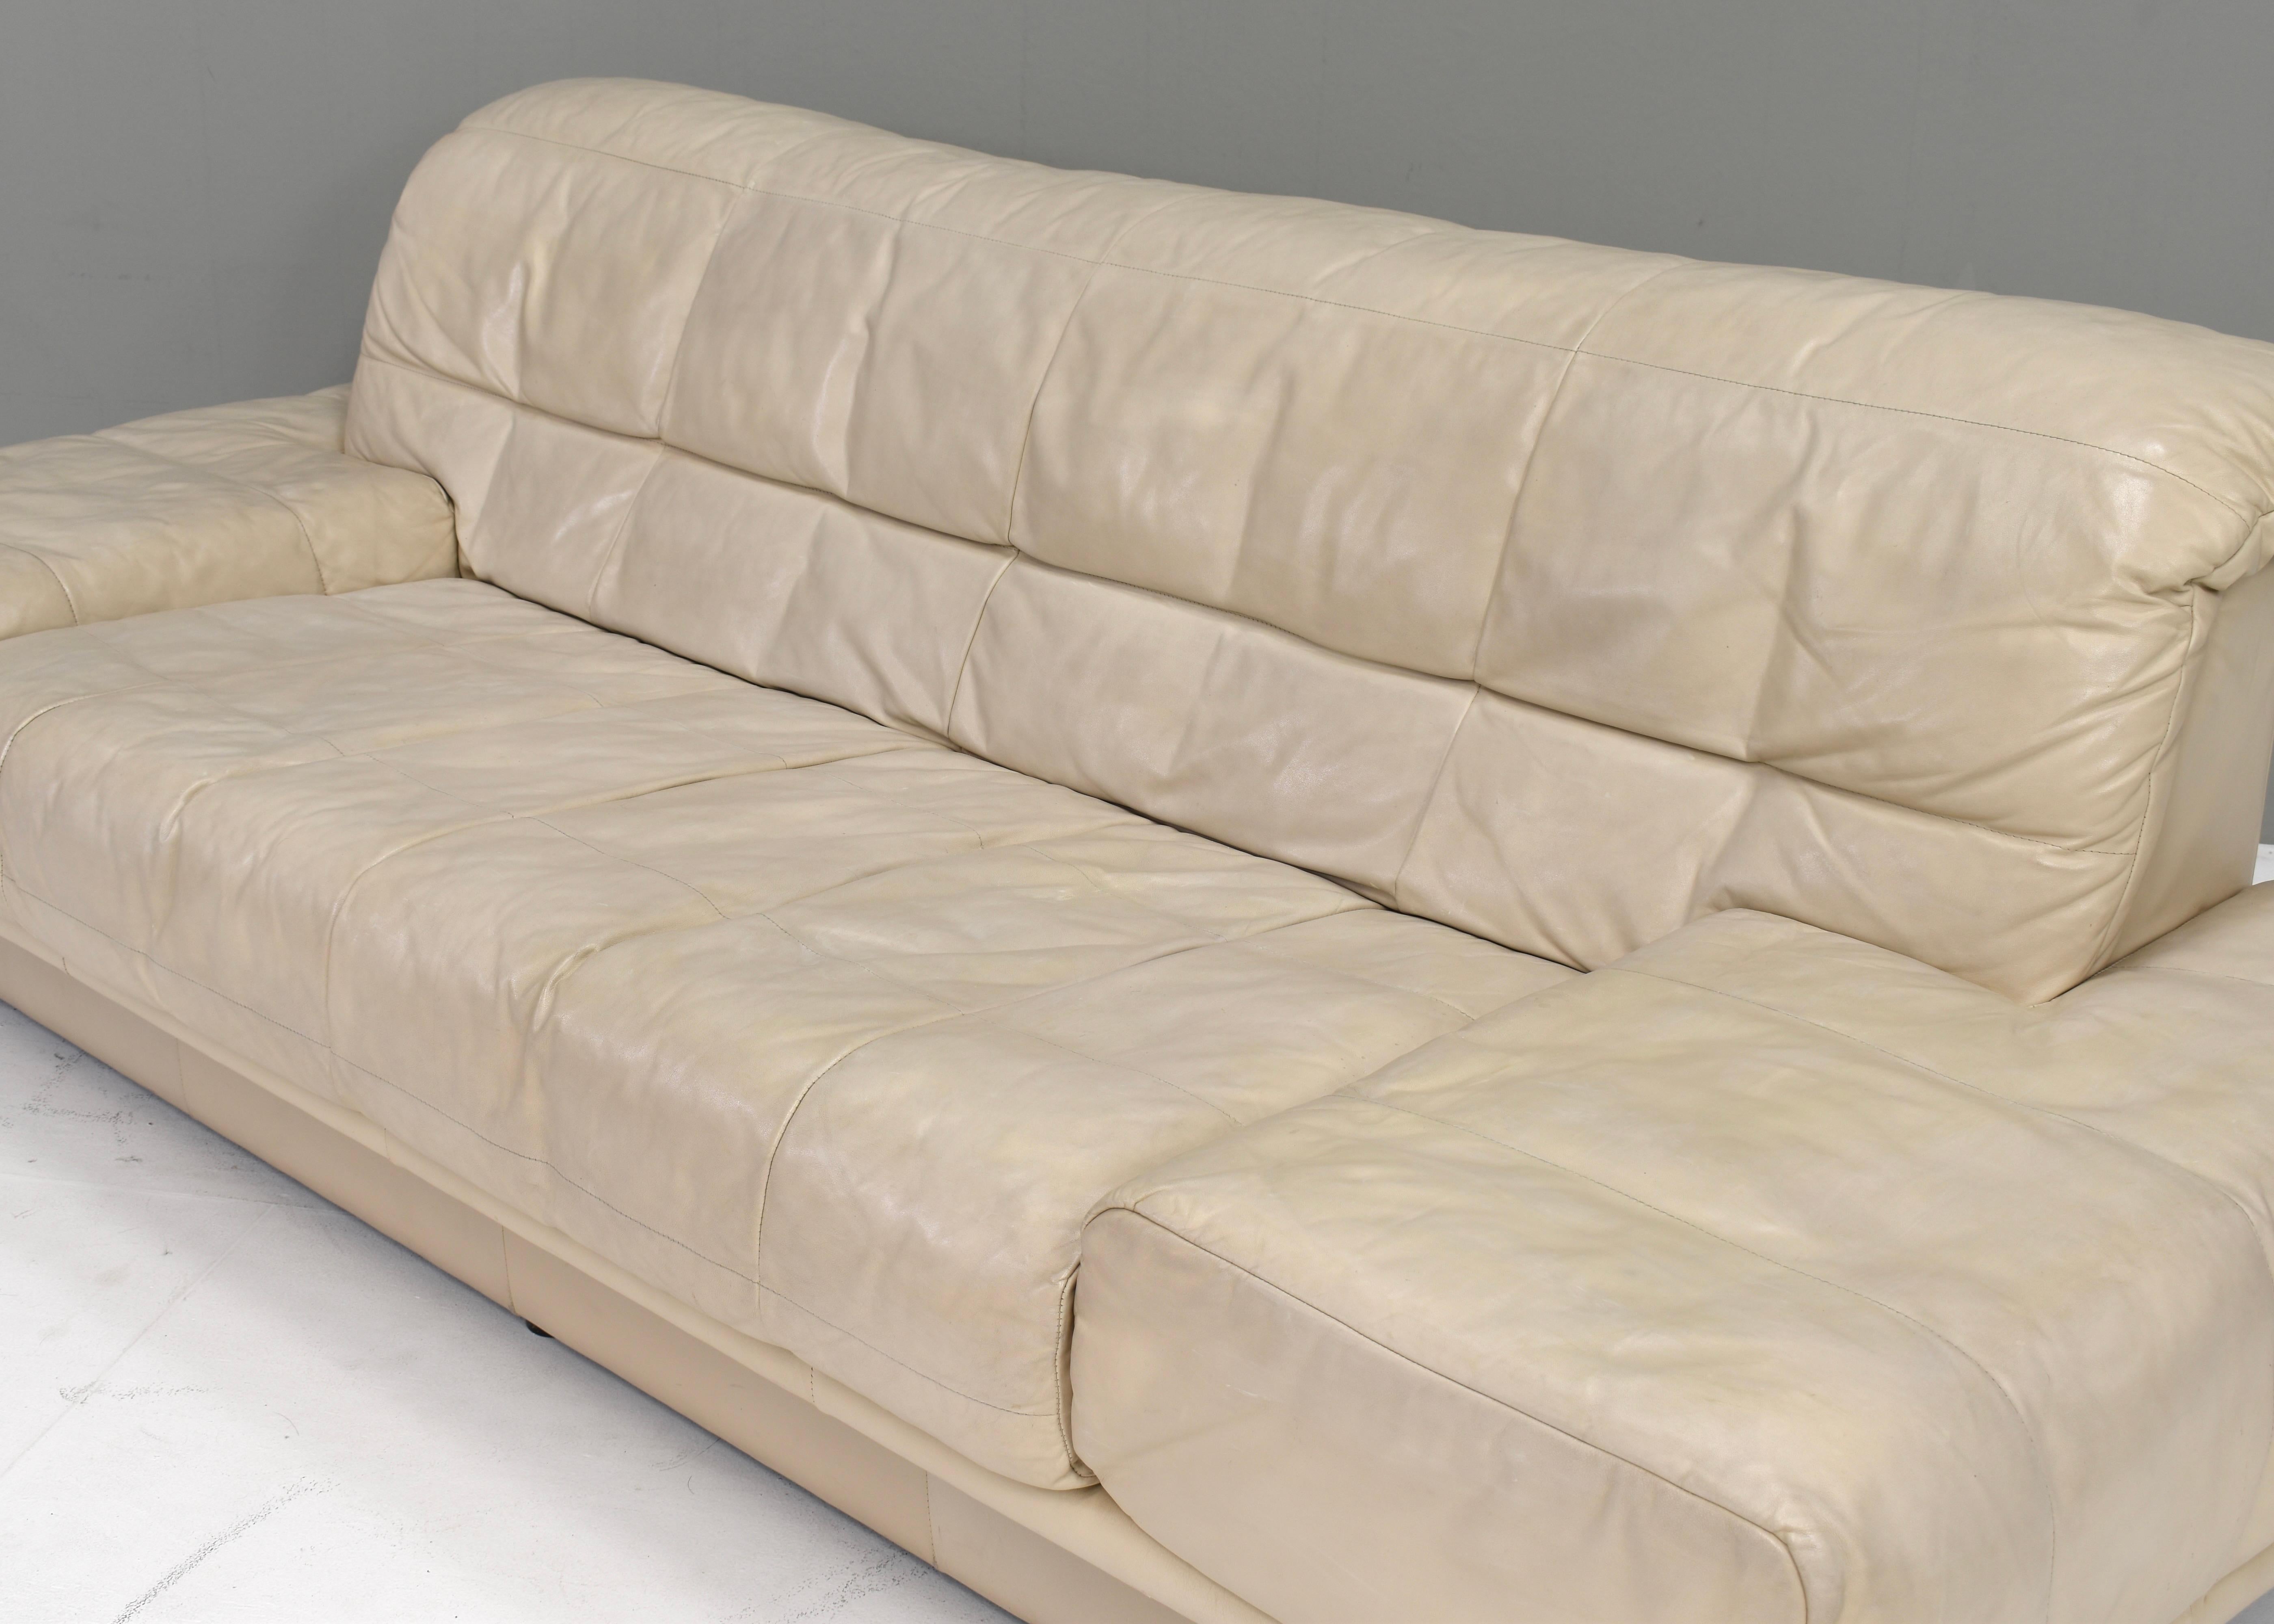 Rolf Benz 3-seat sofa in Ivory Cream Leather – Germany, circa 1980-1990 For Sale 5